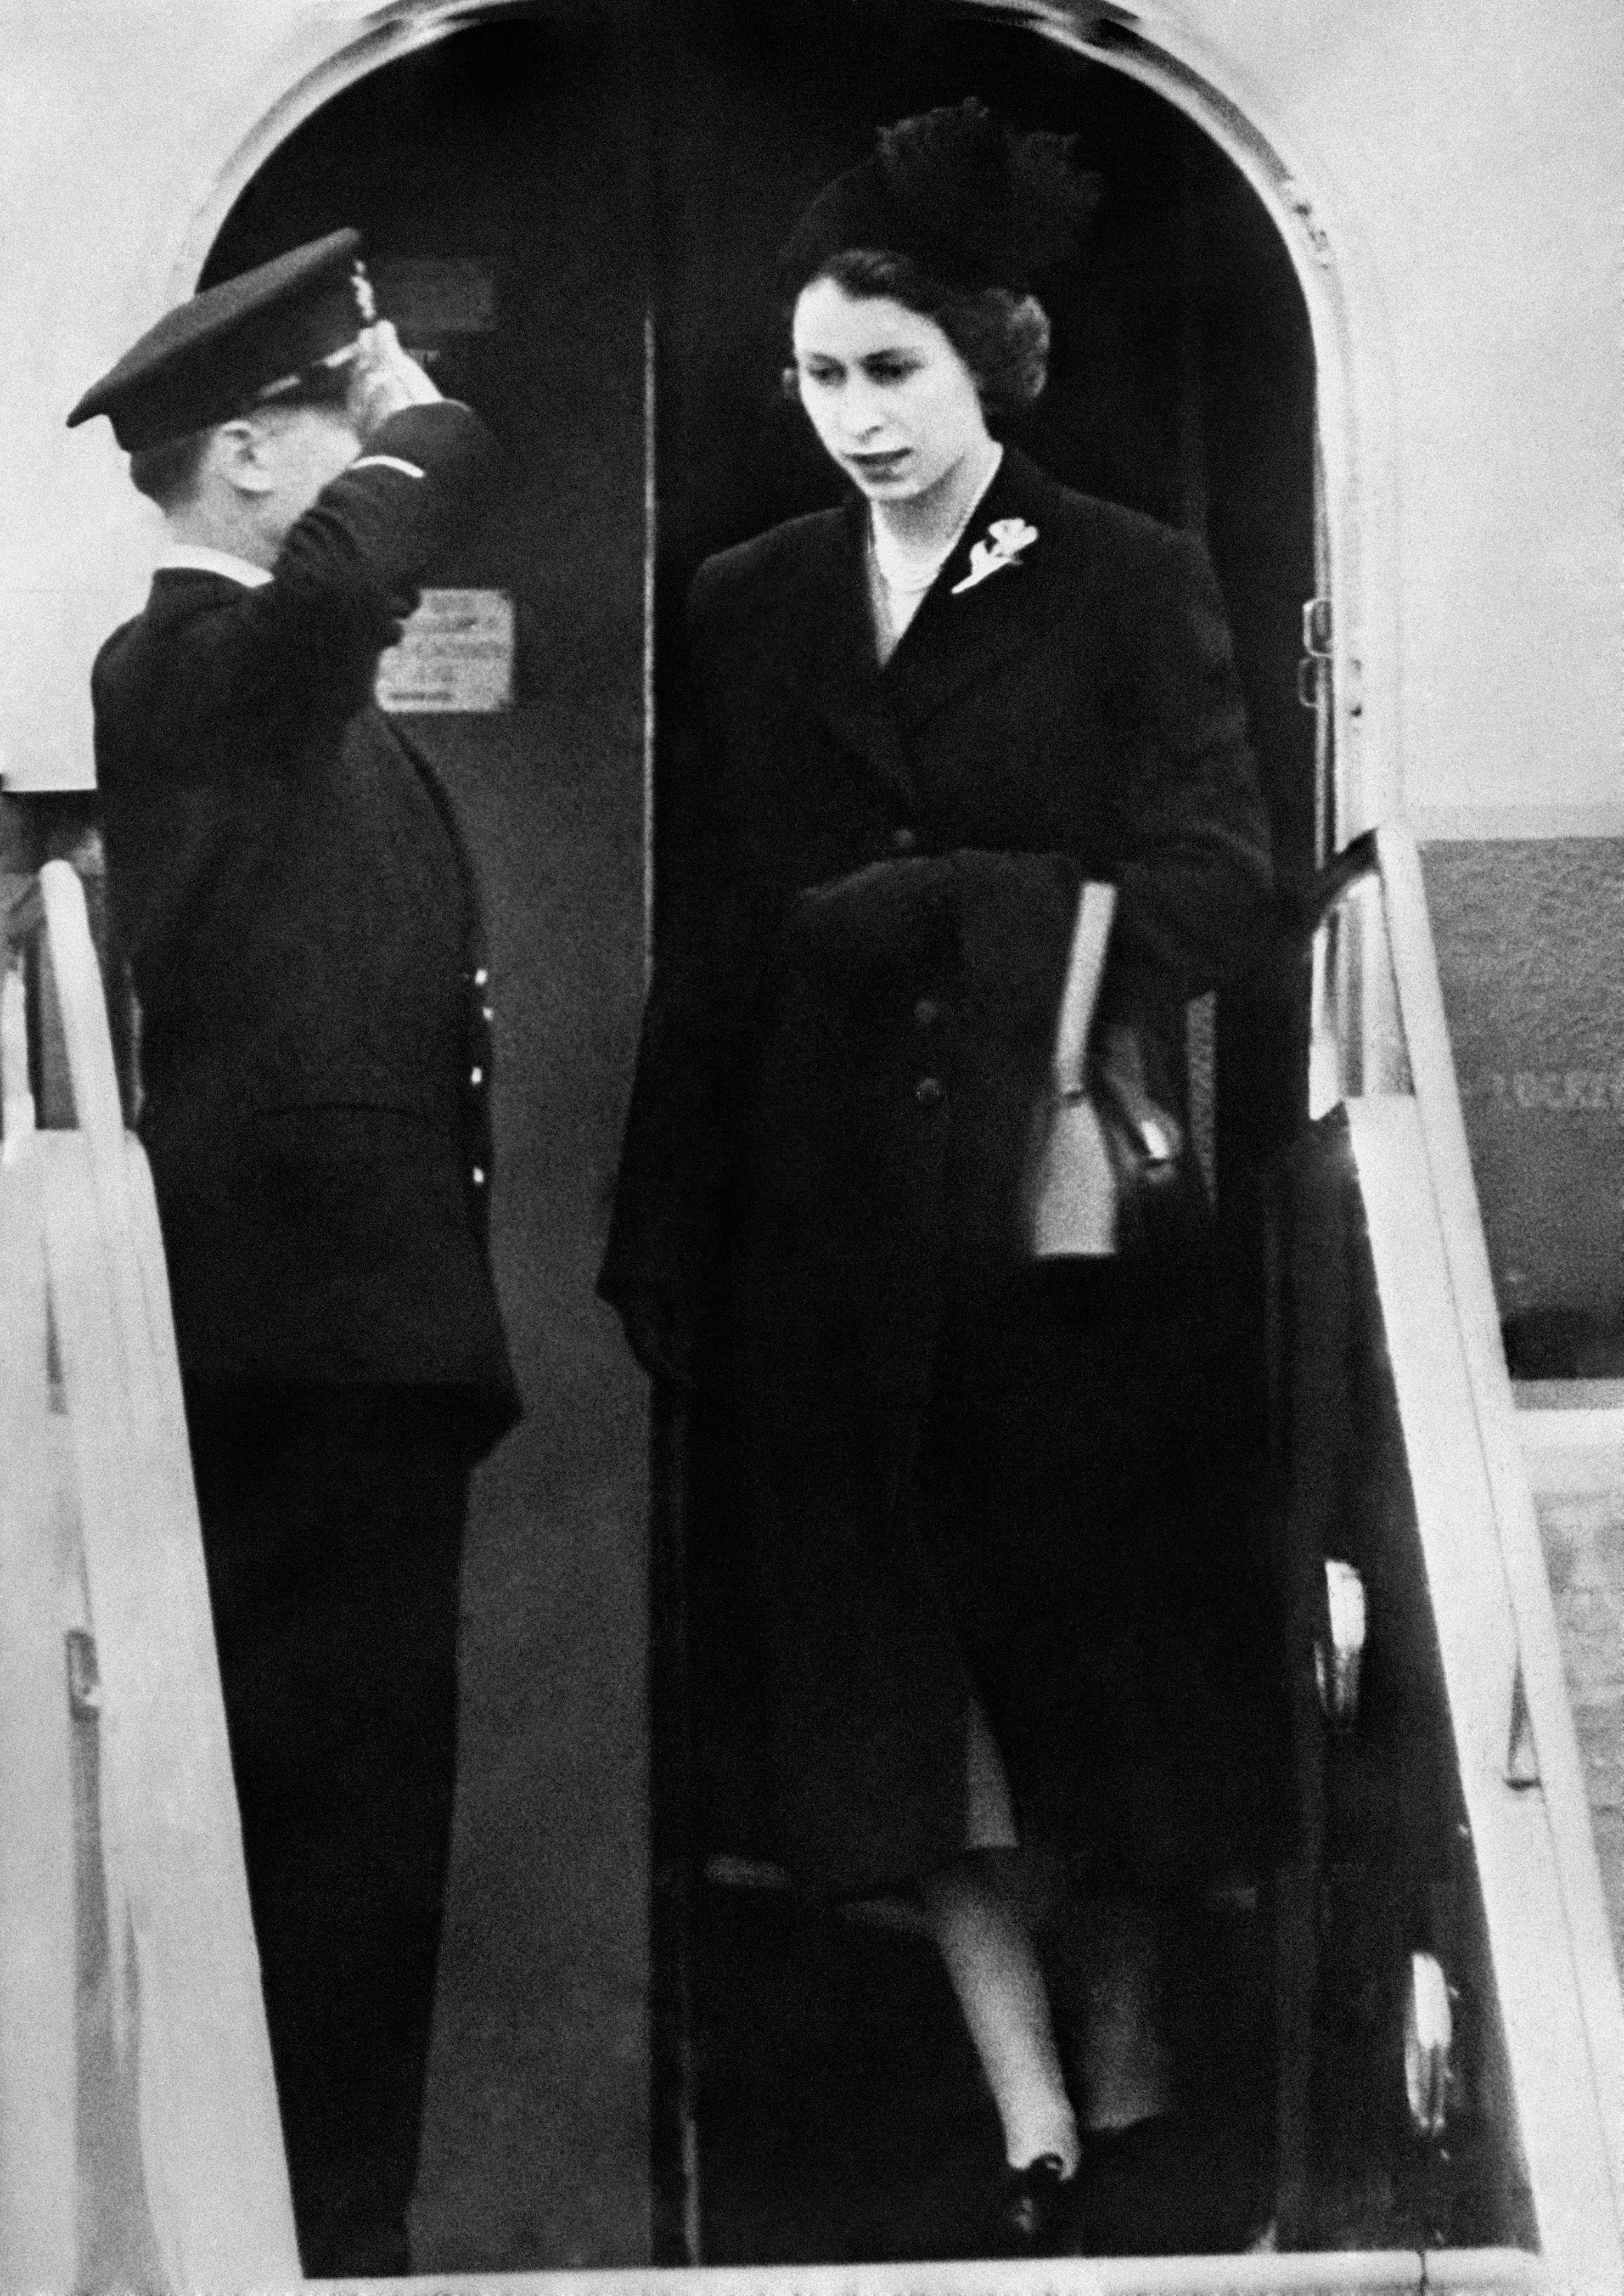 Dressed in black, Queen Elizabeth II sets foot on British soil for the first time since her accession as she lands at London Airport following the death of her father King George VI (PA)